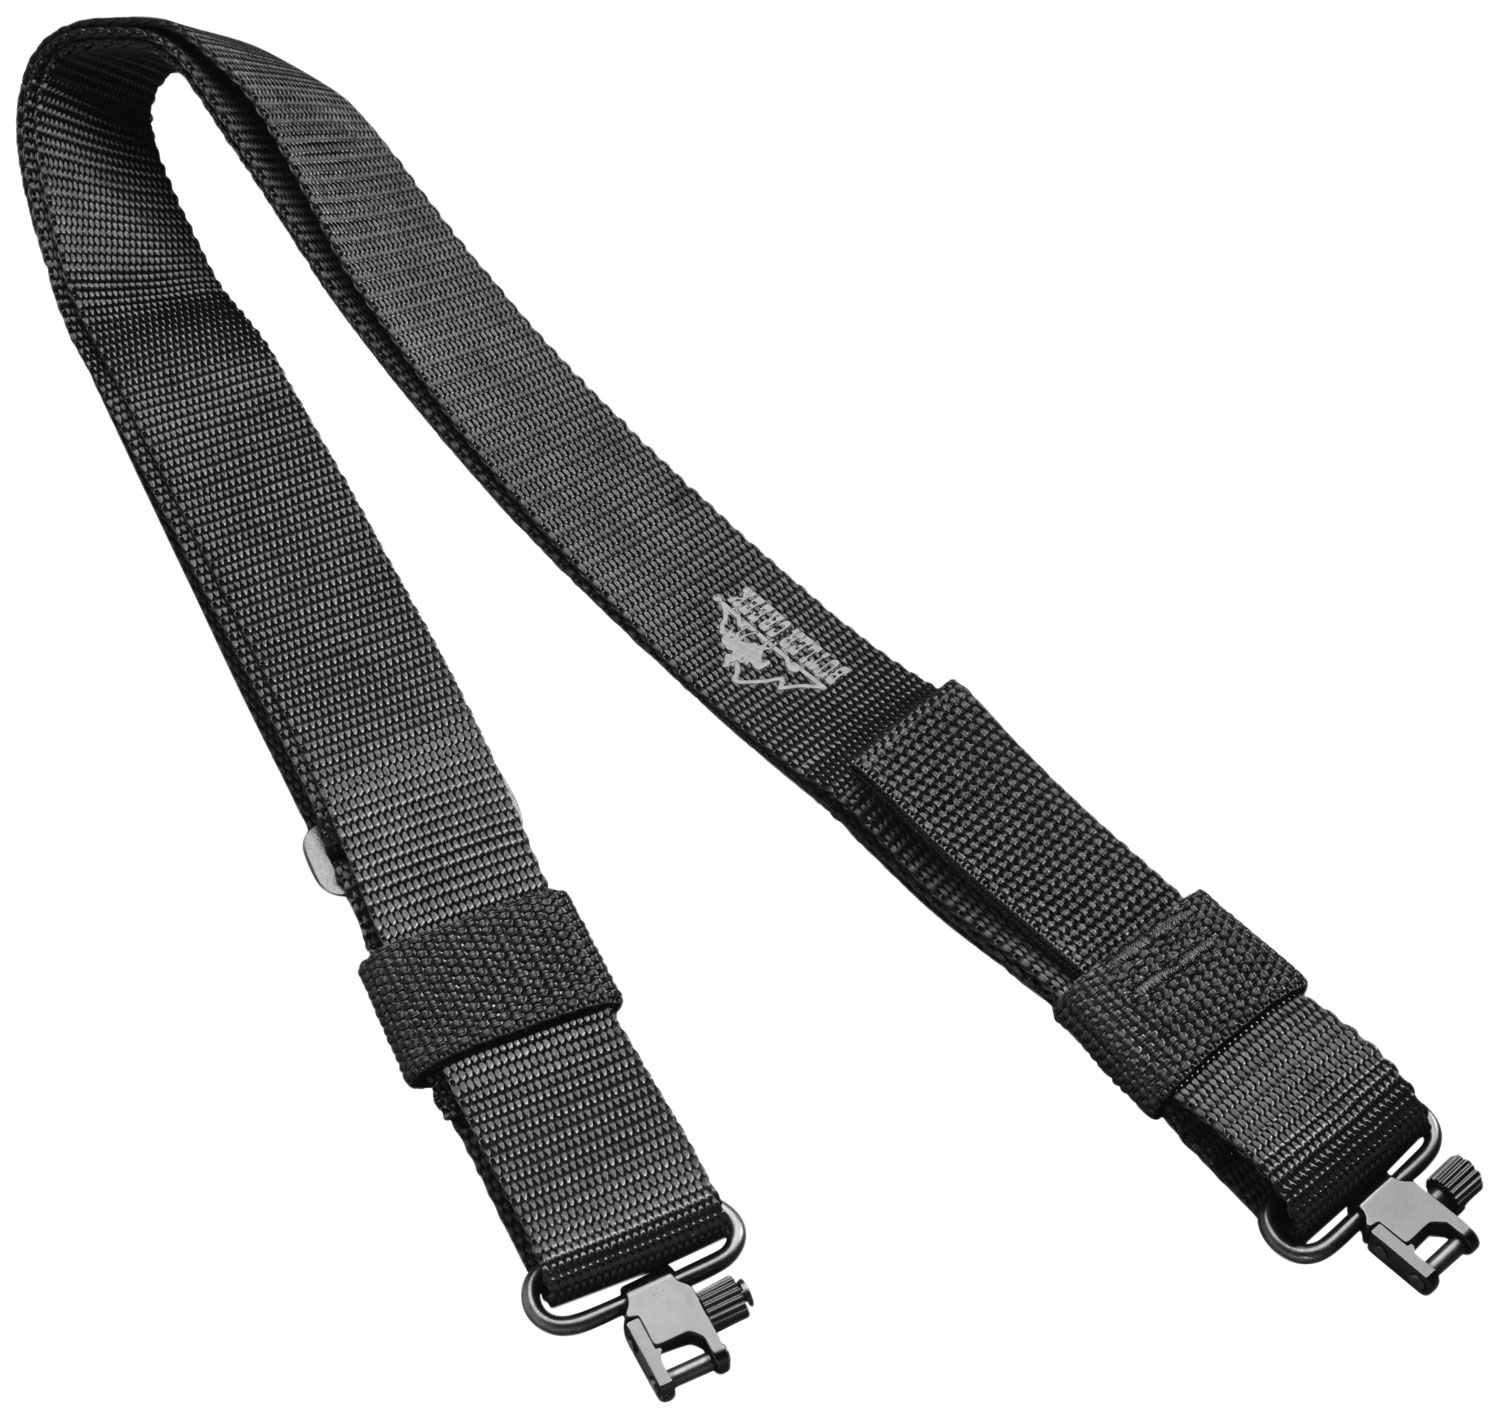 Butler Creek 80091 Quick Carry Sling made of Black Nylon Webbing with 27